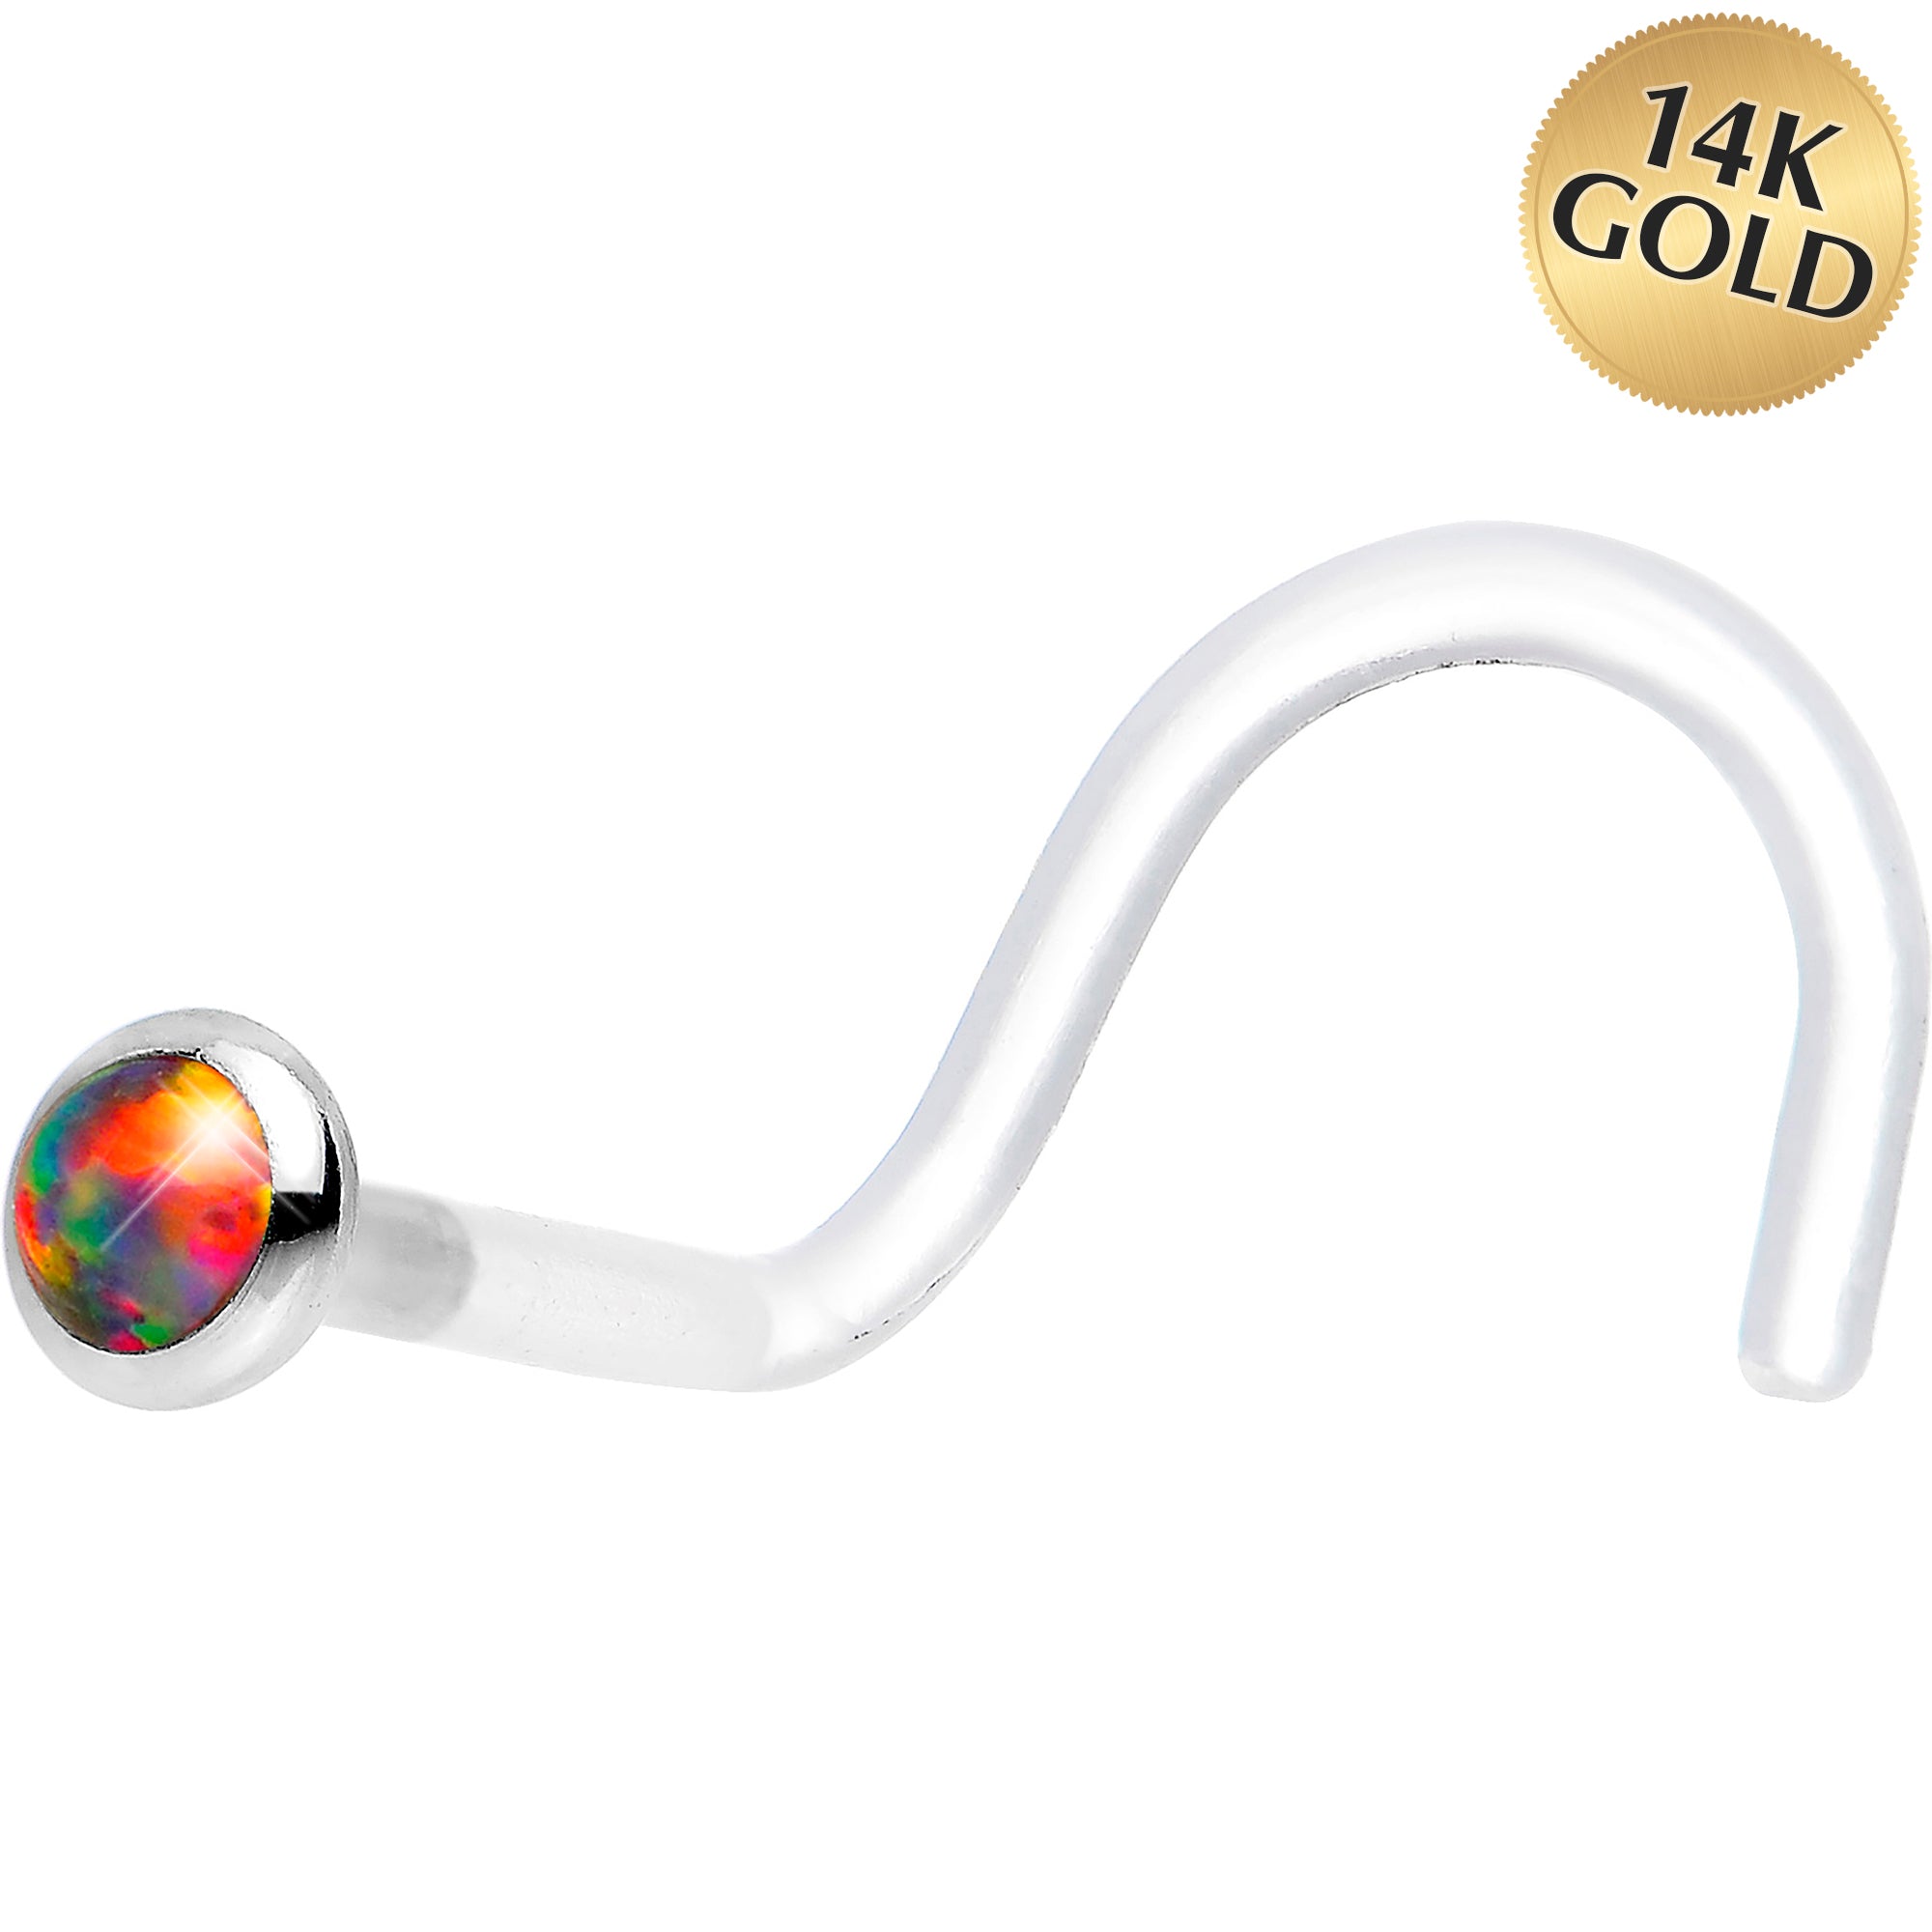 18 Gauge White Gold 2mm Fire Red Synthetic Opal Bioplast Nose Ring